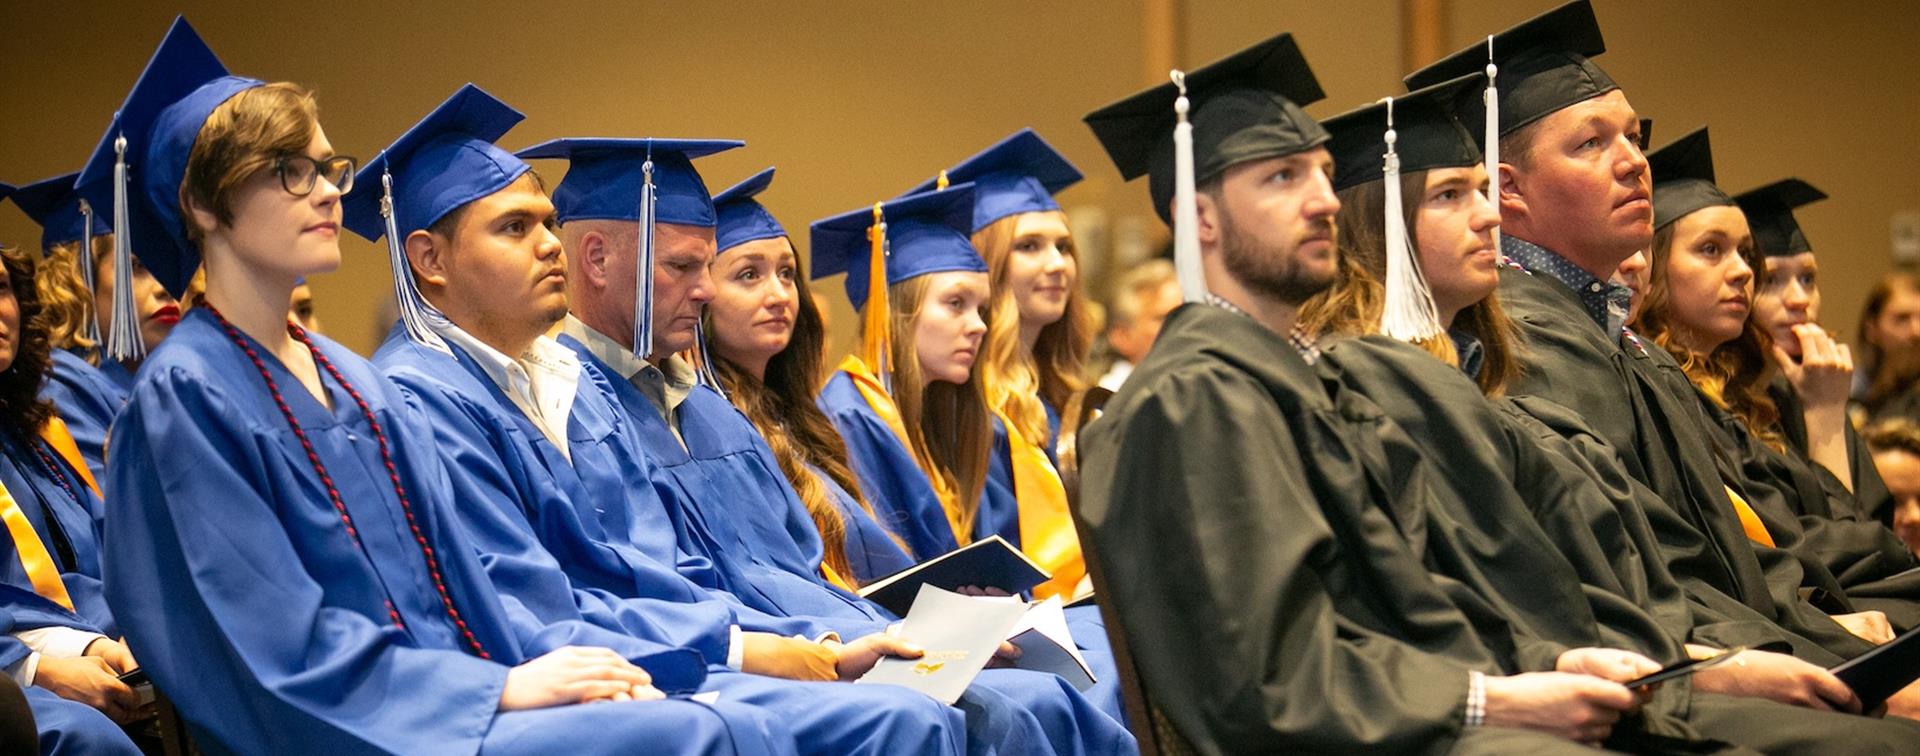 A group of students sit at graduation wearing cap and gowns.